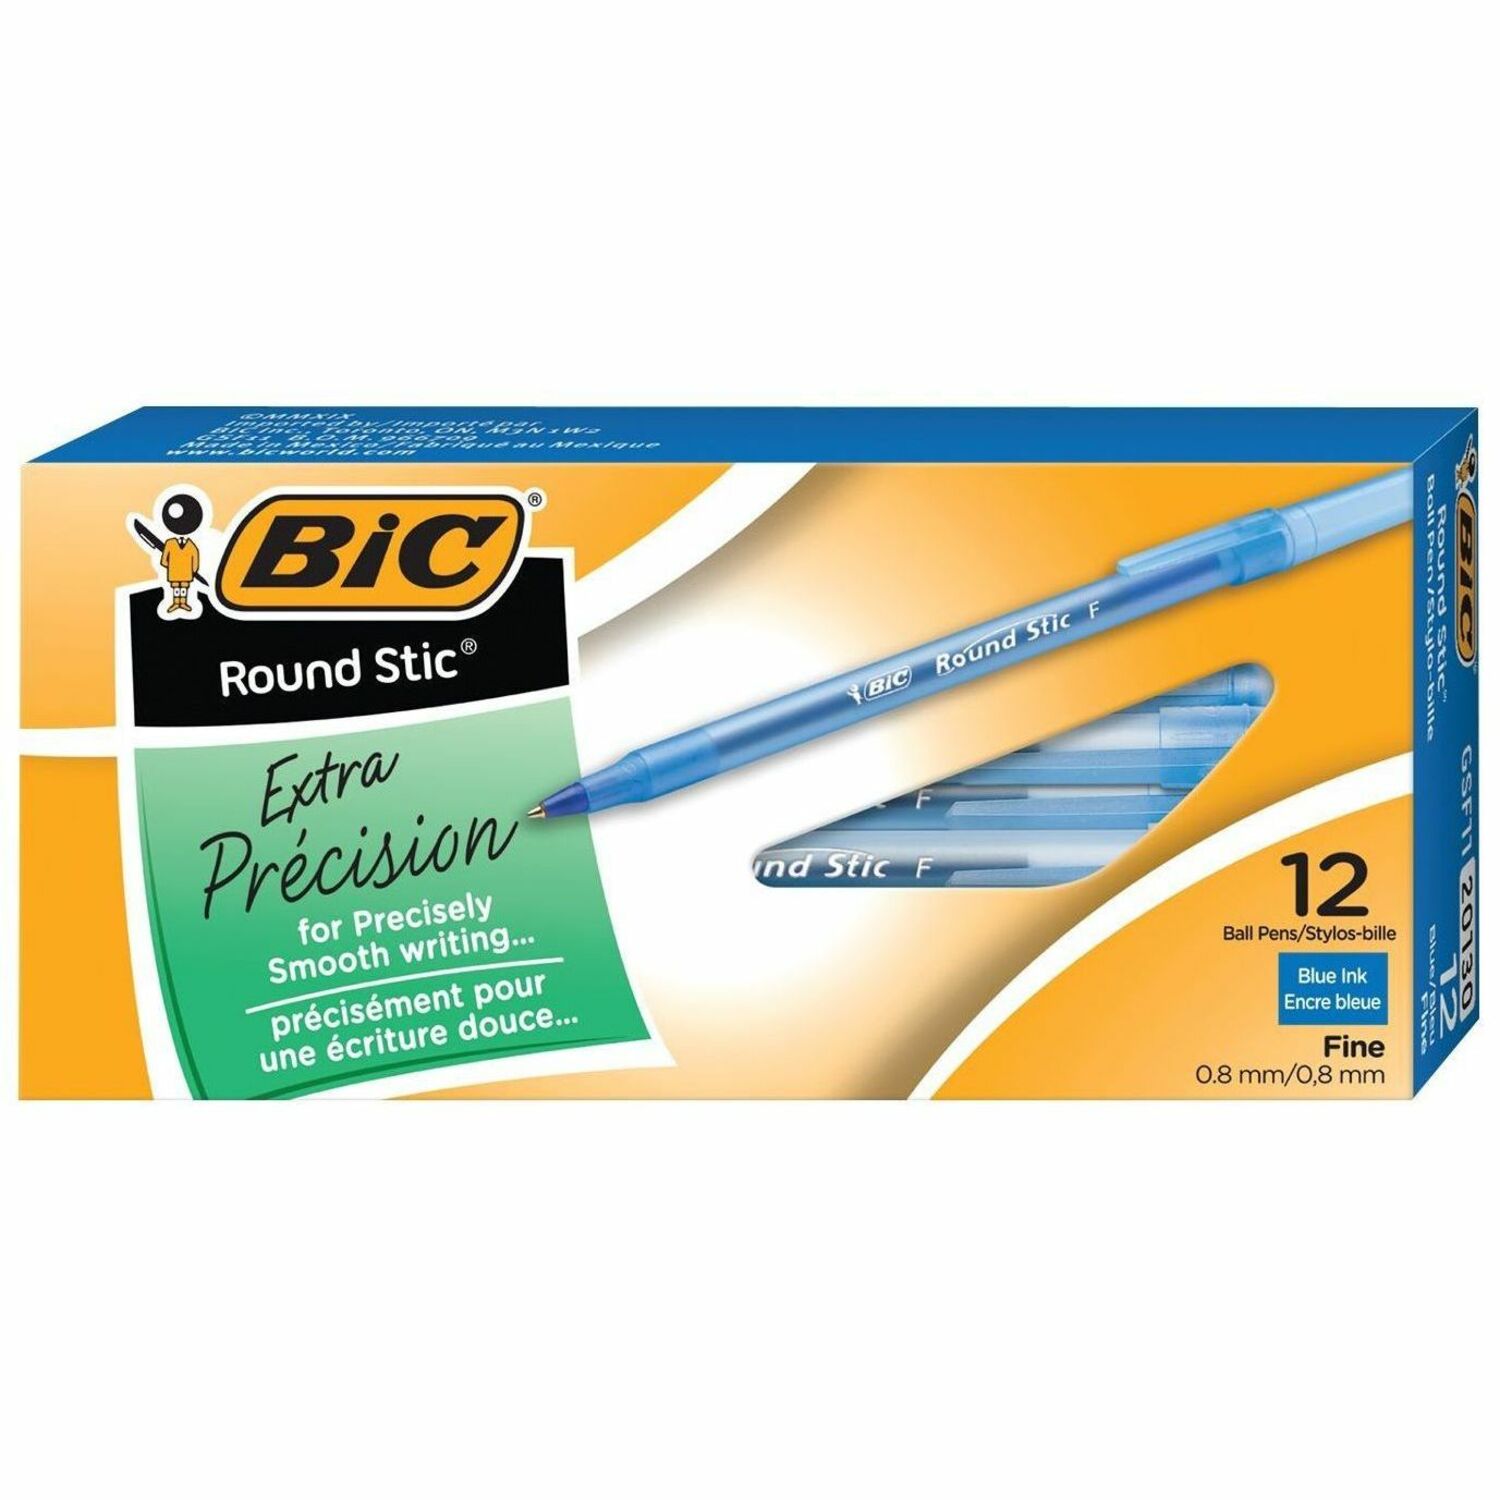 BIC Round Stic Extra Precision Ballpoint Pen, Fine Point For Ultra-Precise Lines (0.8mm), Blue - 12/Pk